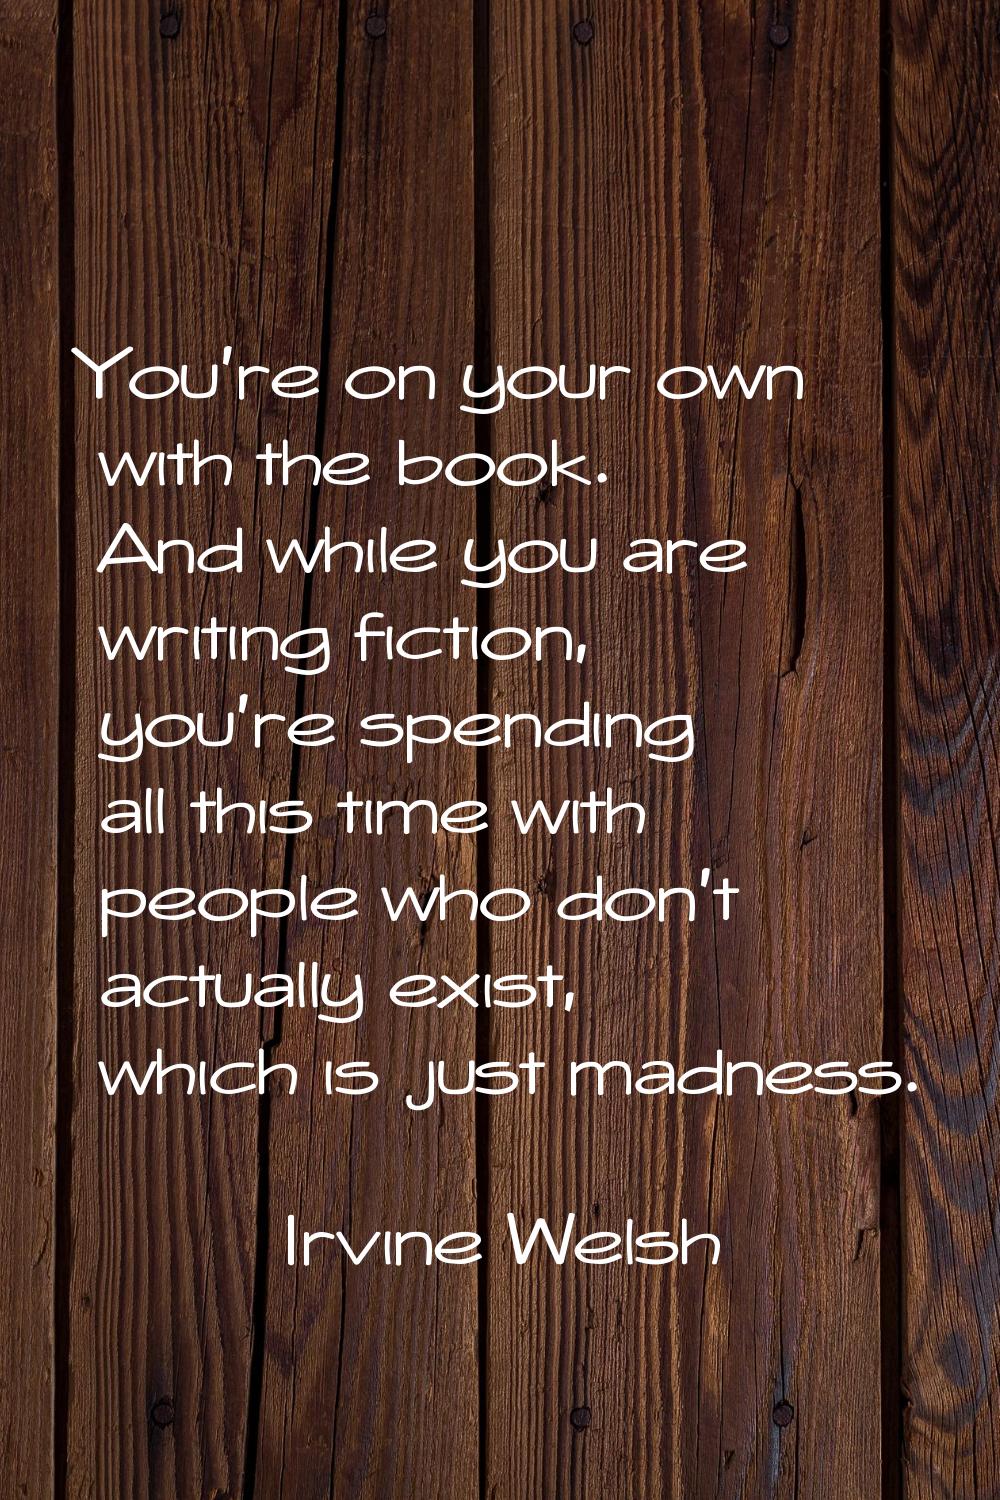 You're on your own with the book. And while you are writing fiction, you're spending all this time 